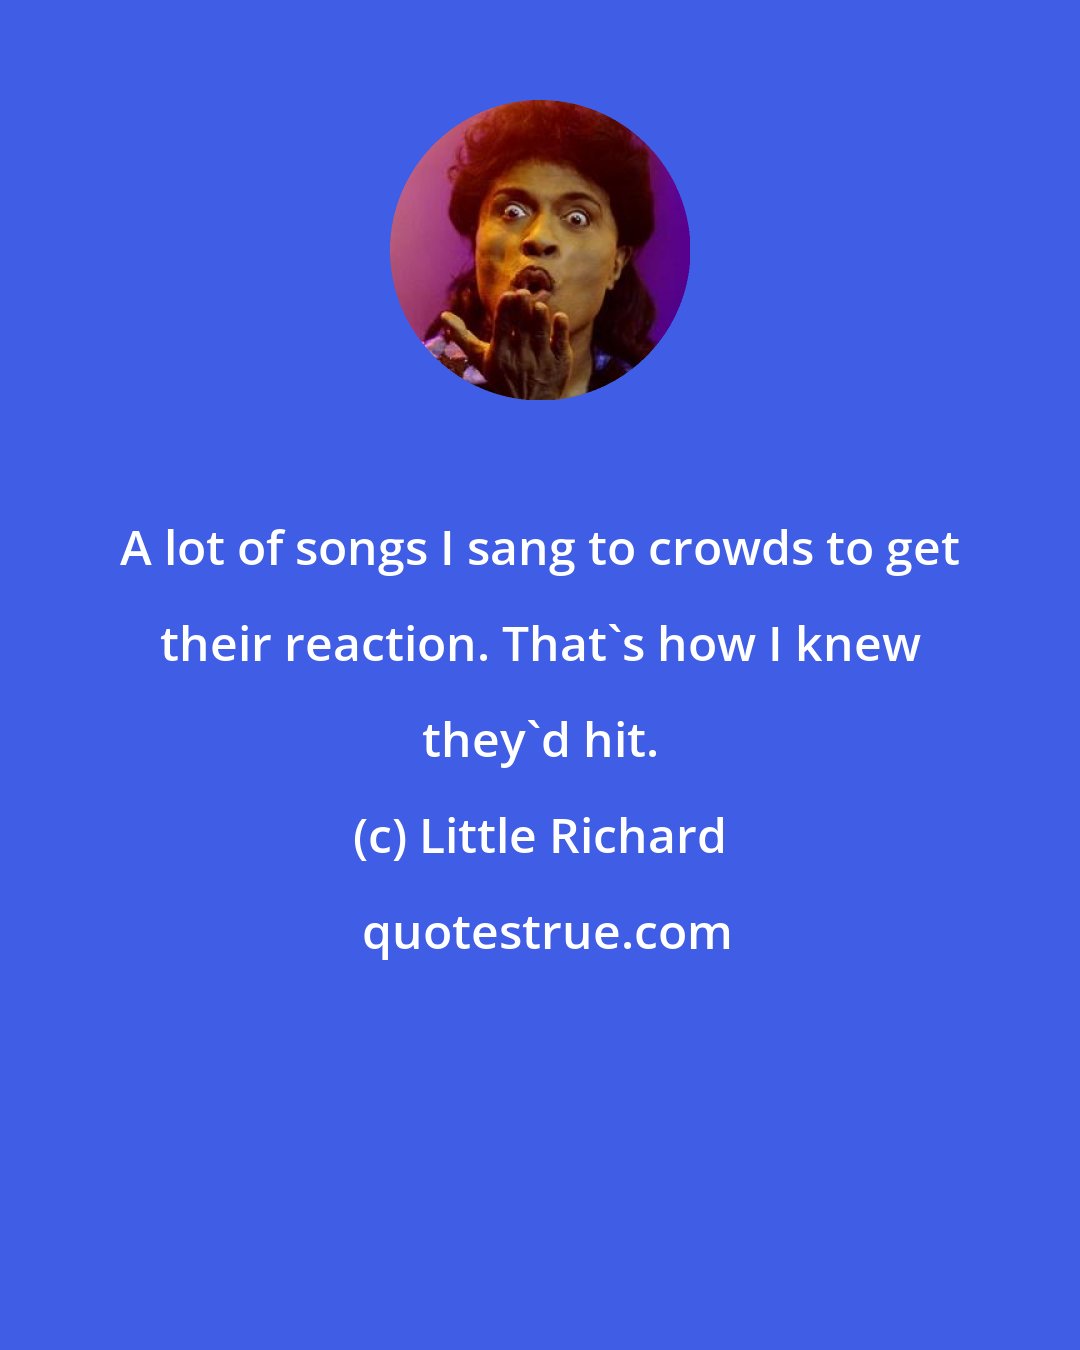 Little Richard: A lot of songs I sang to crowds to get their reaction. That's how I knew they'd hit.